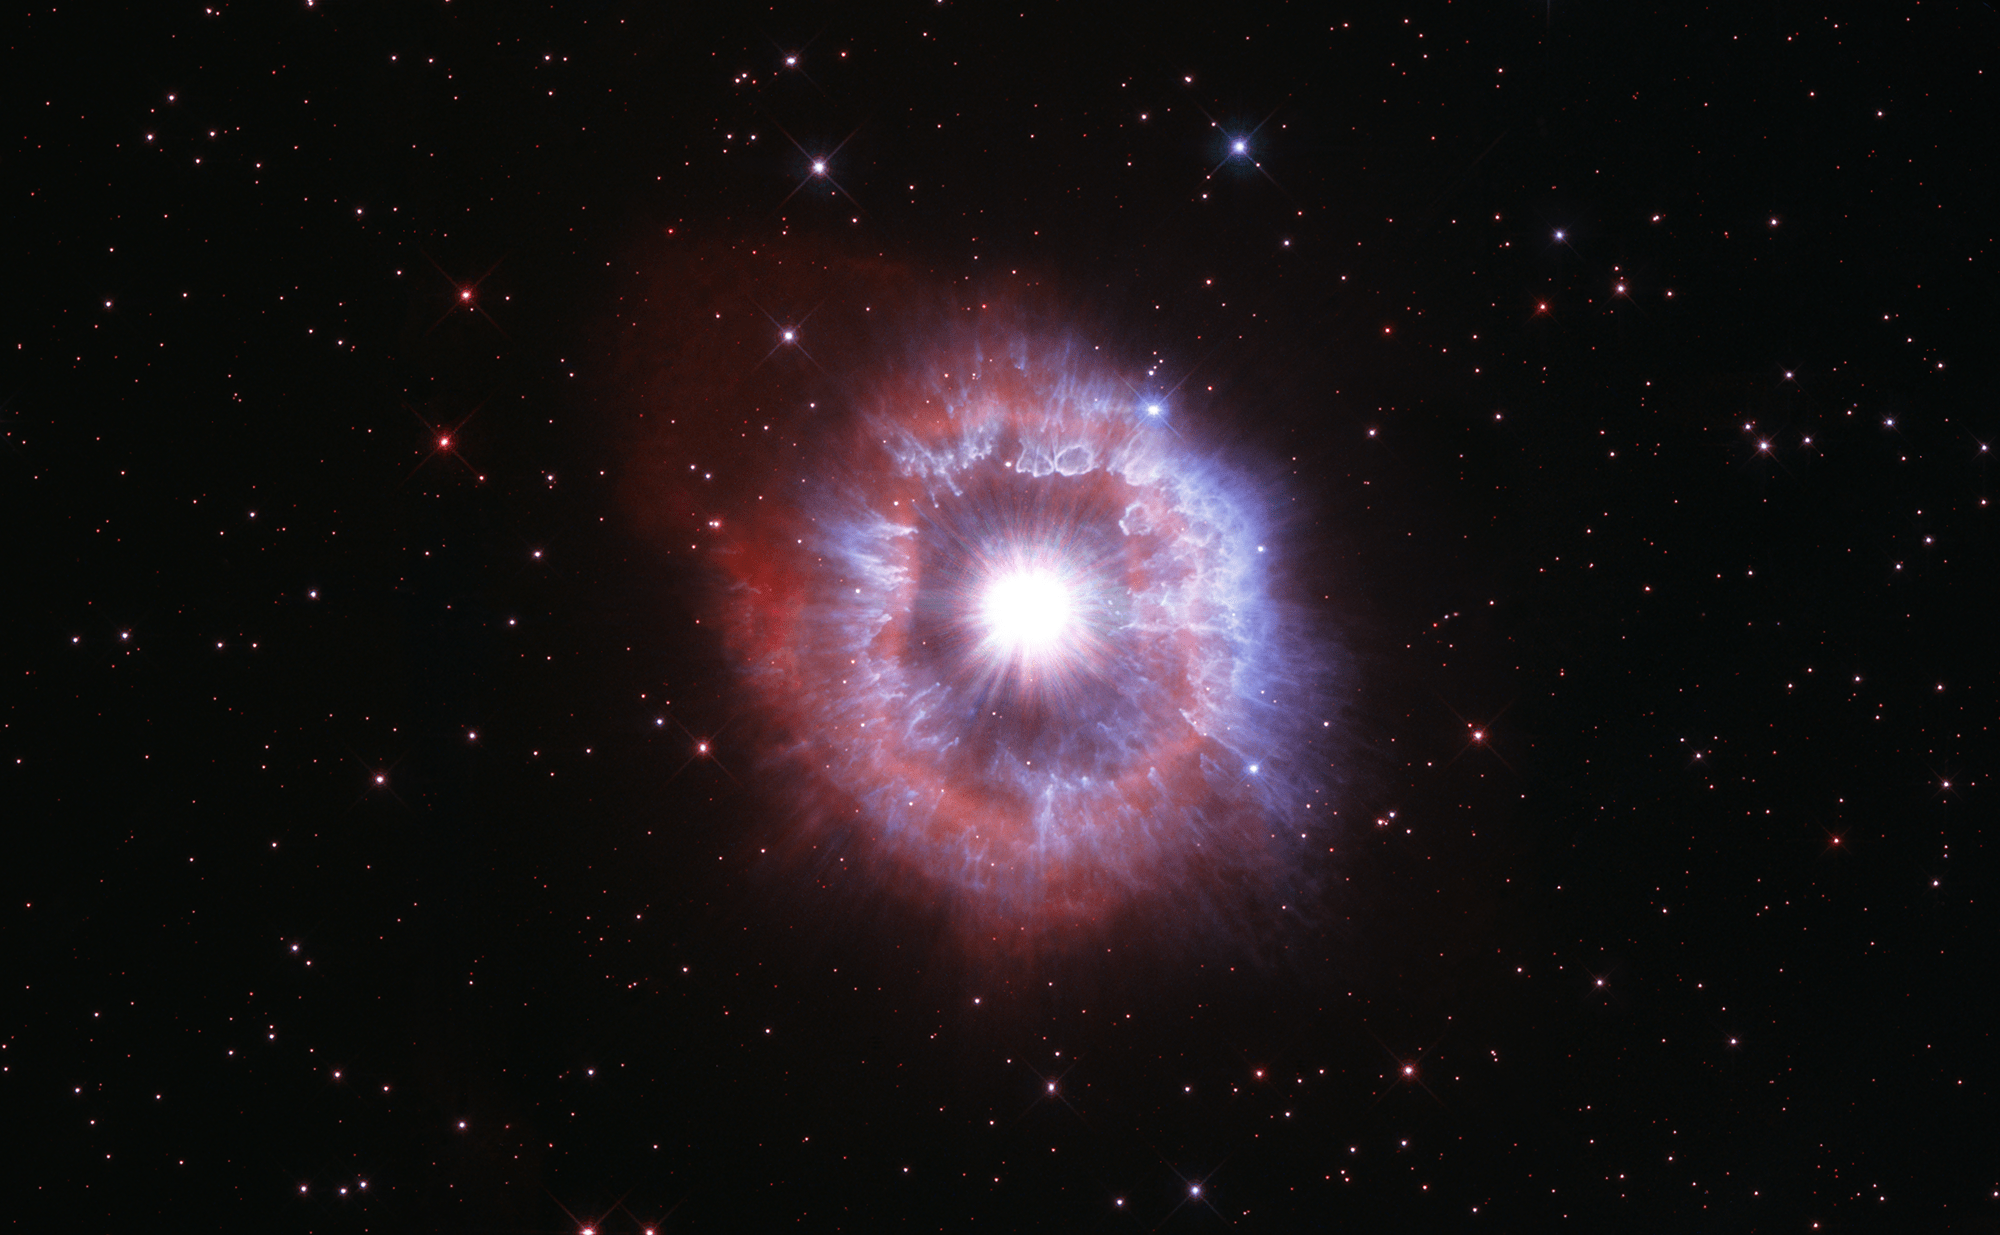 Bright-white star surrounded by a pinkish and white shell of gas. Black background dotted with stars.